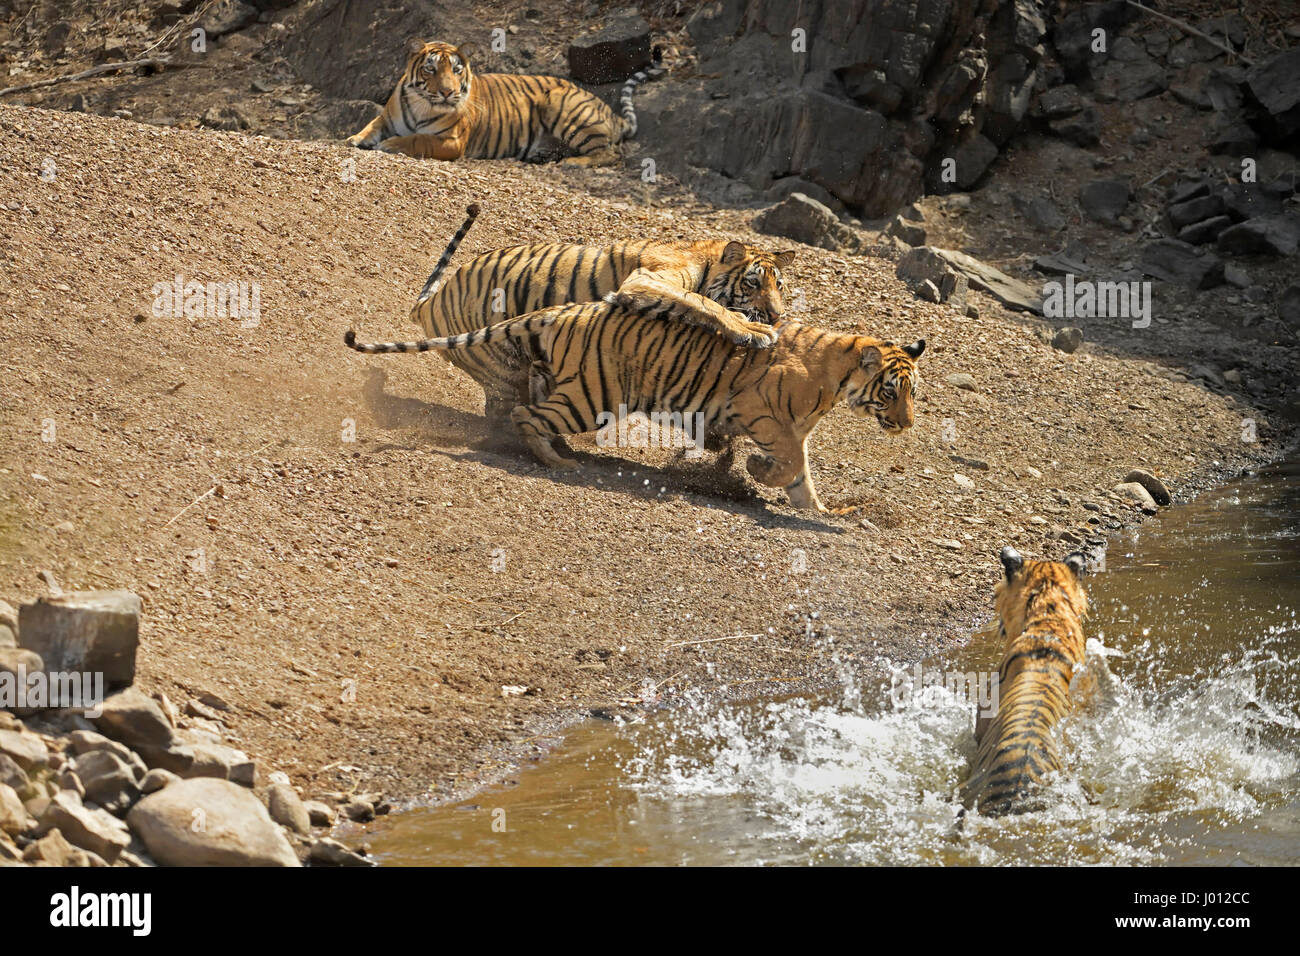 A family of tigers, mother with her three sub-adult cubs cooling off in a water hole during the hot and dry summers in Ranthambhore tiger reserve of I Stock Photo